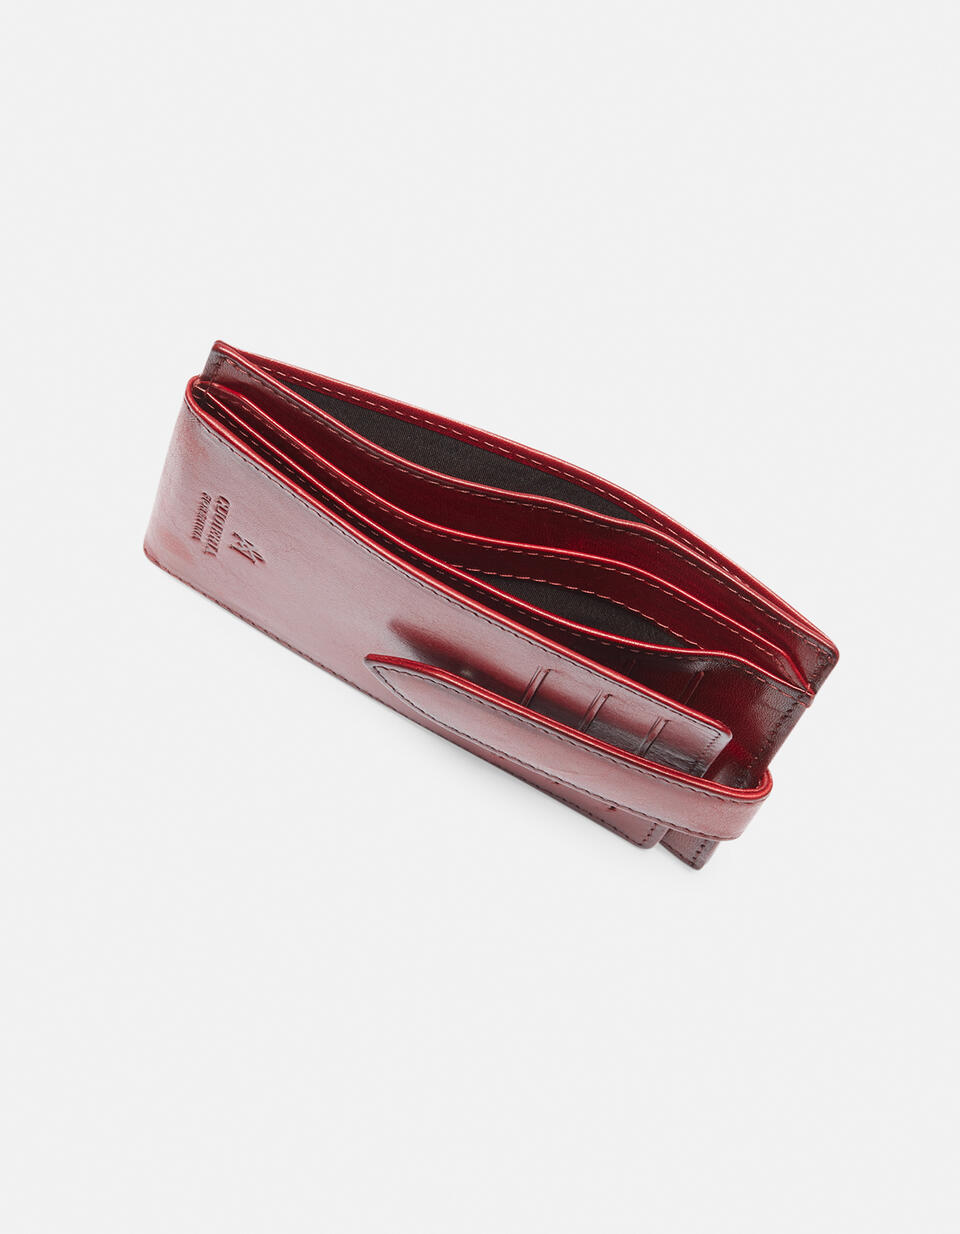 Warm and Color Anti-RFID cardholder - Women's Wallets - Men's Wallets | Wallets ROSSO - Women's Wallets - Men's Wallets | WalletsCuoieria Fiorentina